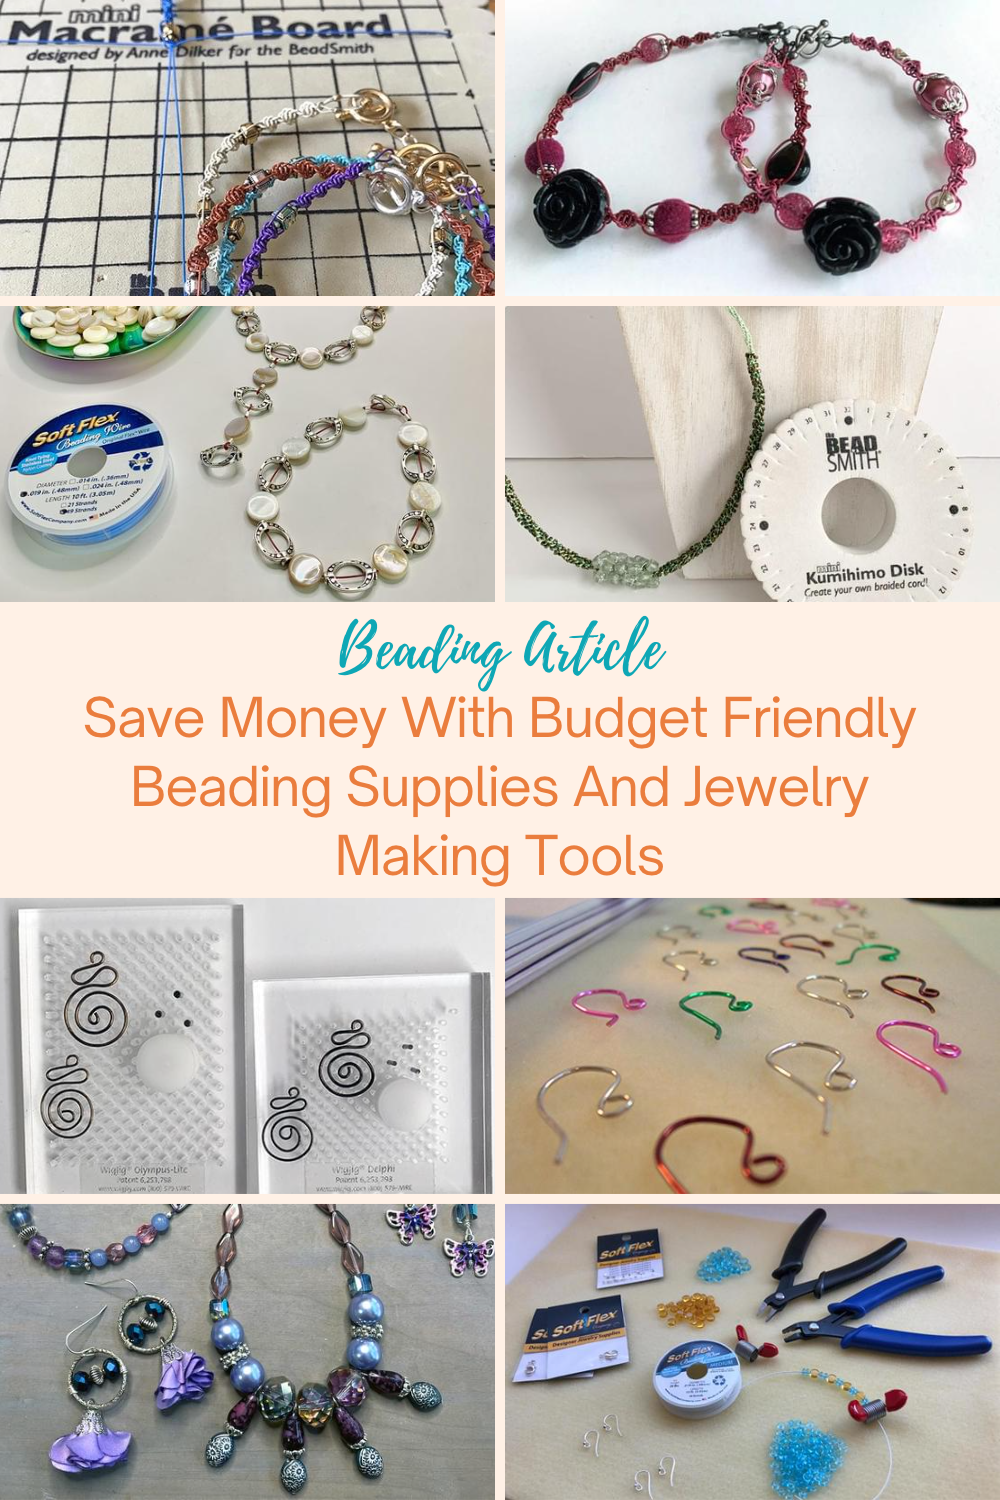 Save Money With Budget Friendly Beading Supplies And Jewelry Making Tools Collage